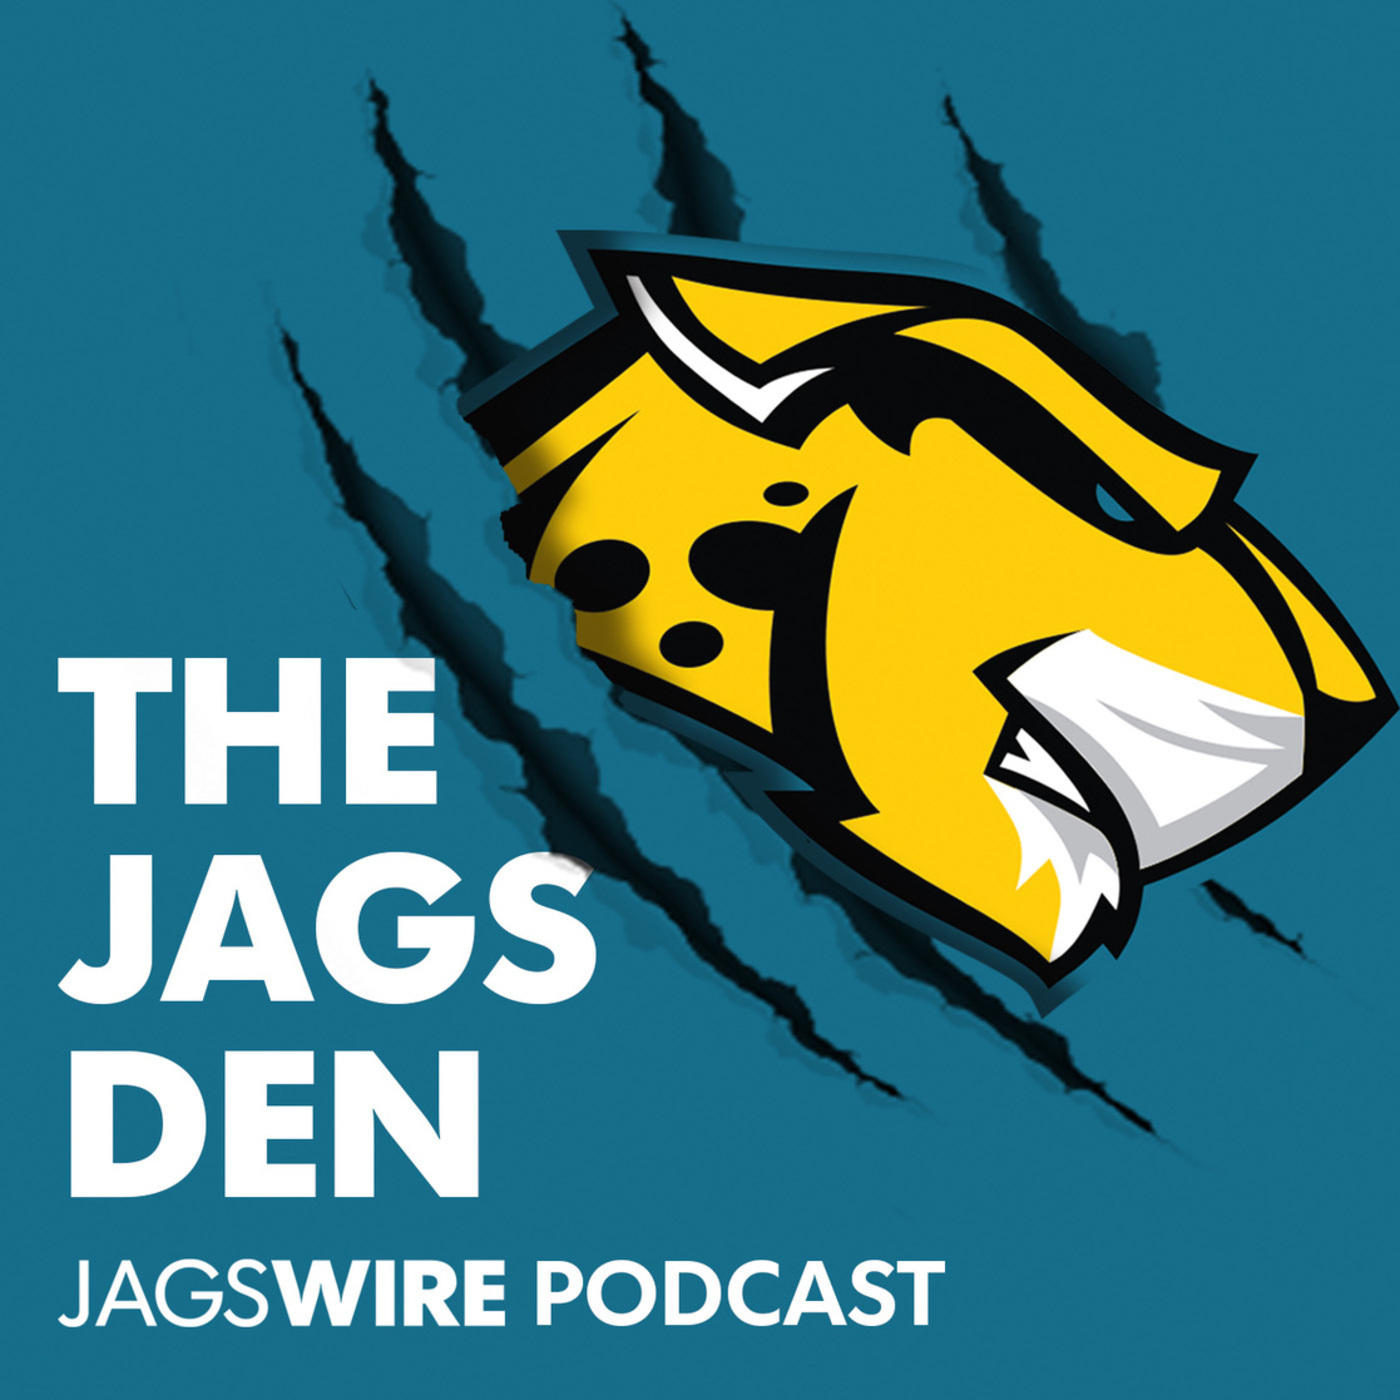 Jags Den Podcast Ep. 46: Cam Robinson's abrupt return, Graham reveals why Foles considered retirement, preseason Week 2 players to watch